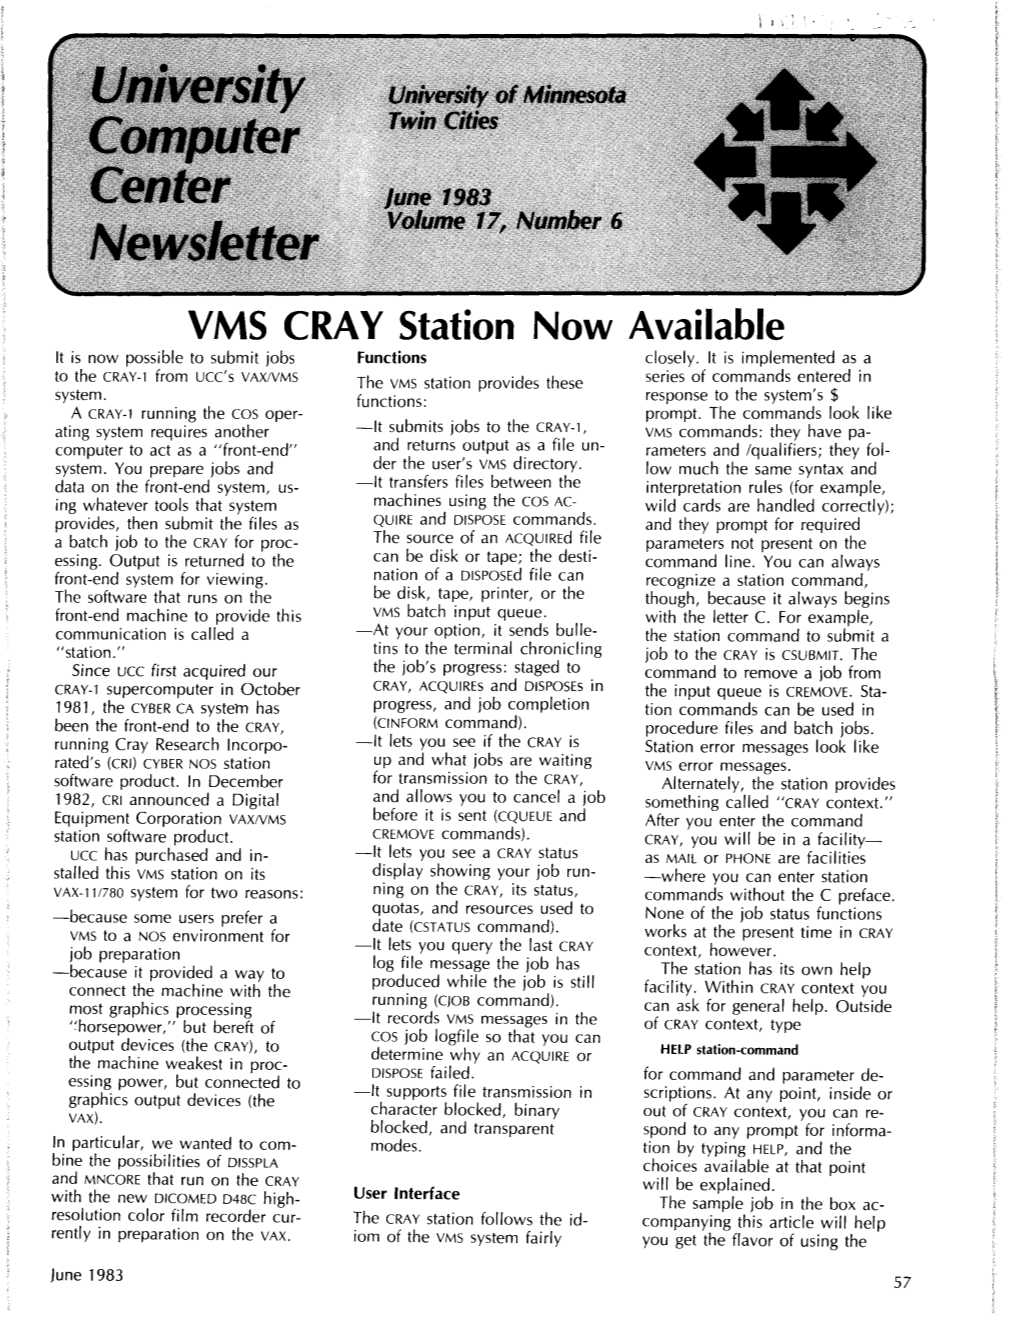 VMS CRA Y Station Now Available It Is Now Possible to Submit Jobs Functions Closely